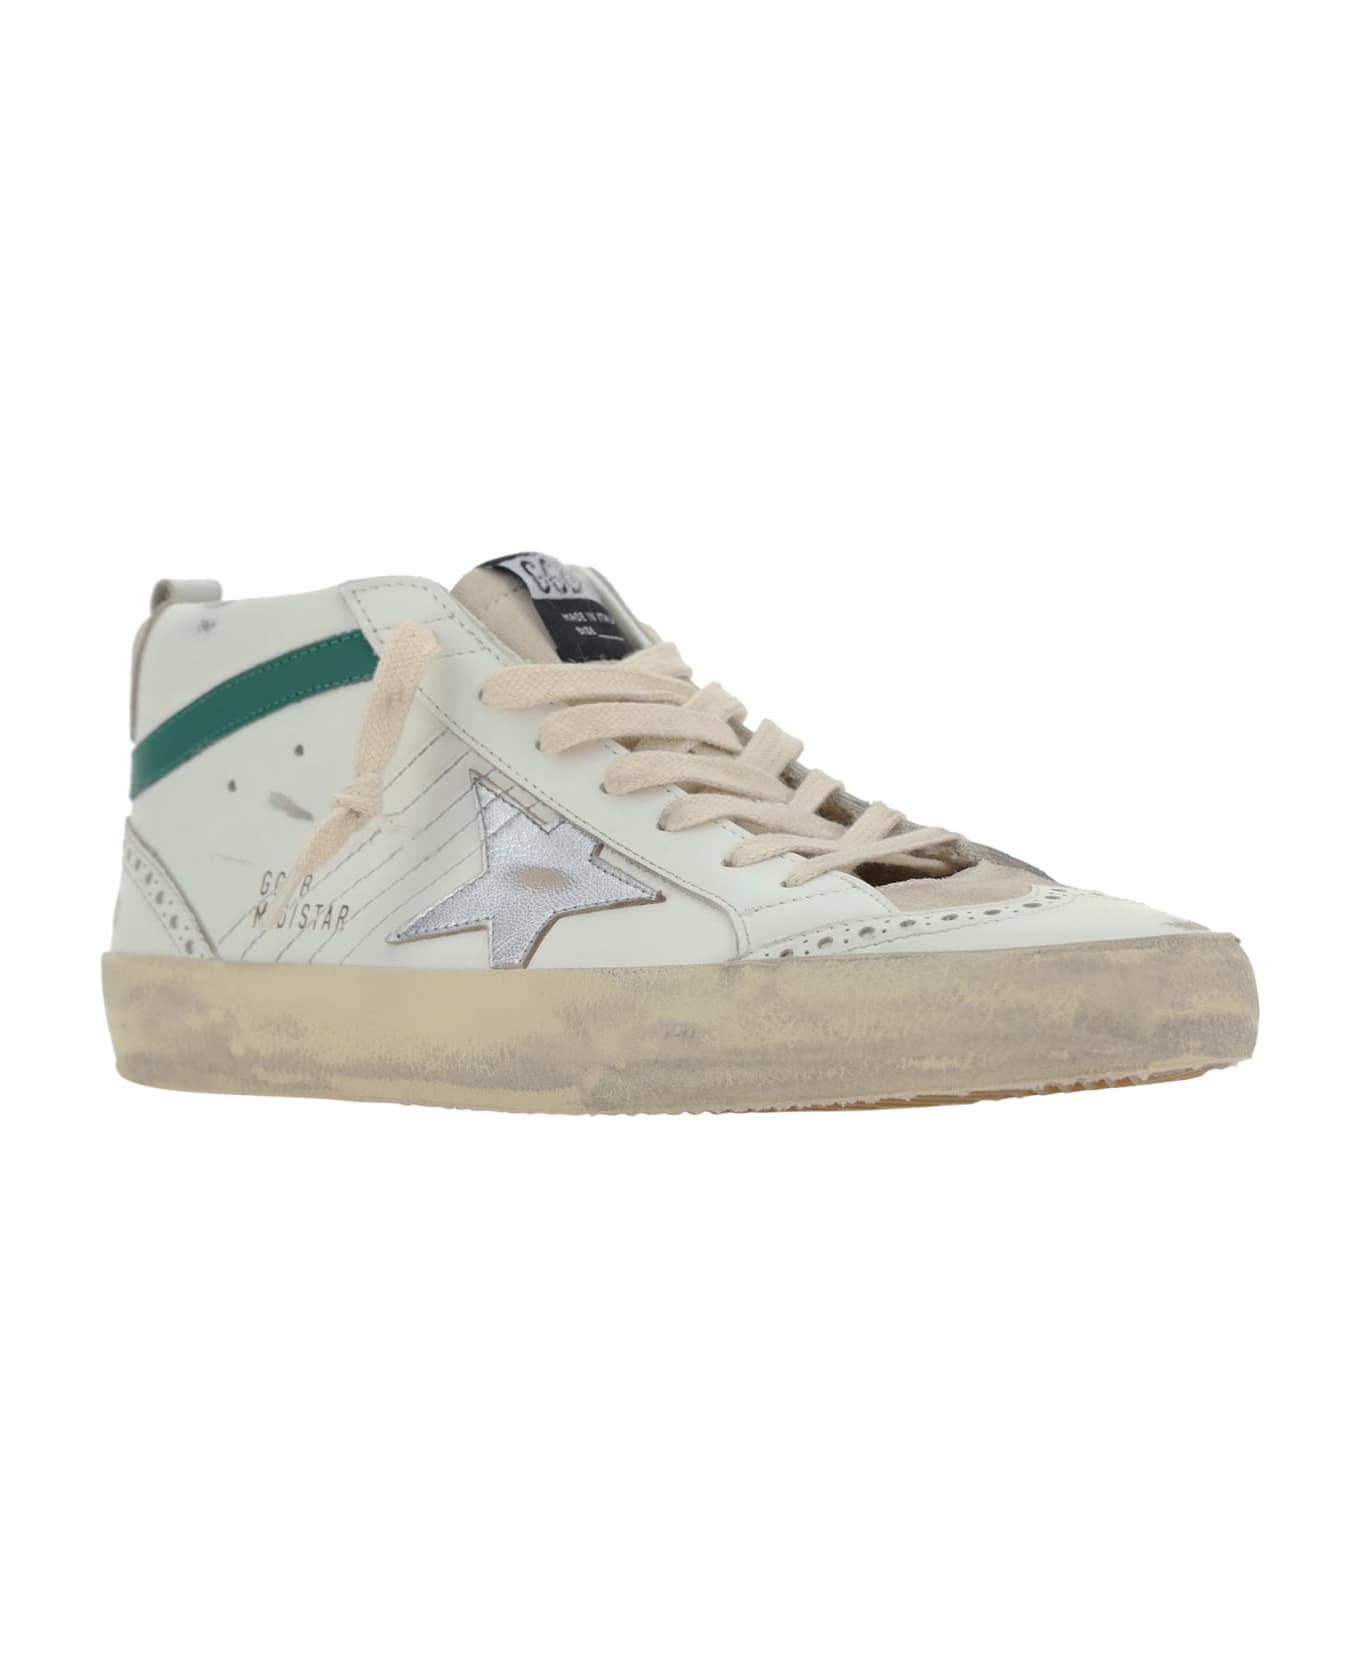 Golden Goose Mid Star Sneakers - White/seedpearl/silver/green